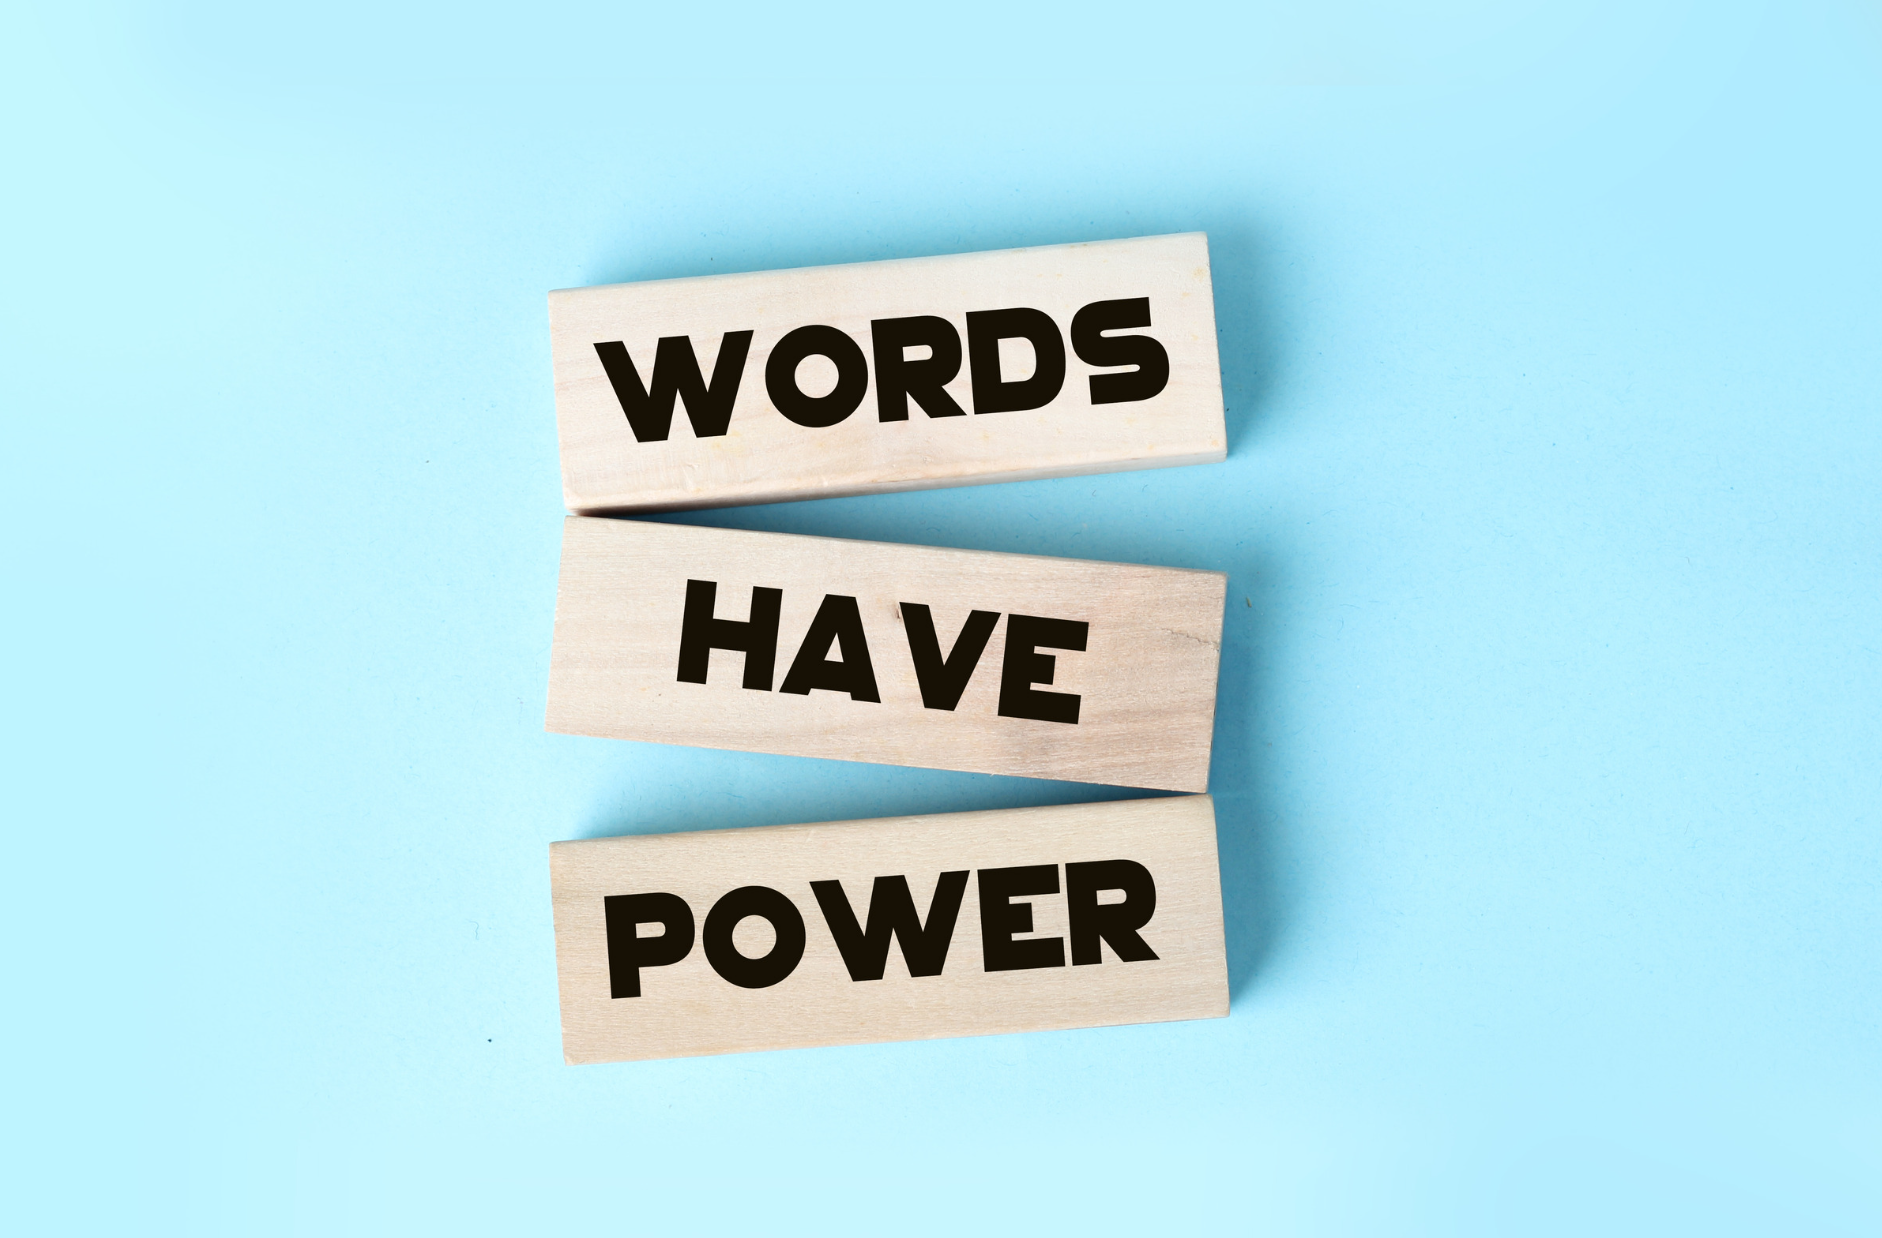 Words have power written on wooden blocks. Copywriters can help make your words even more powerful.